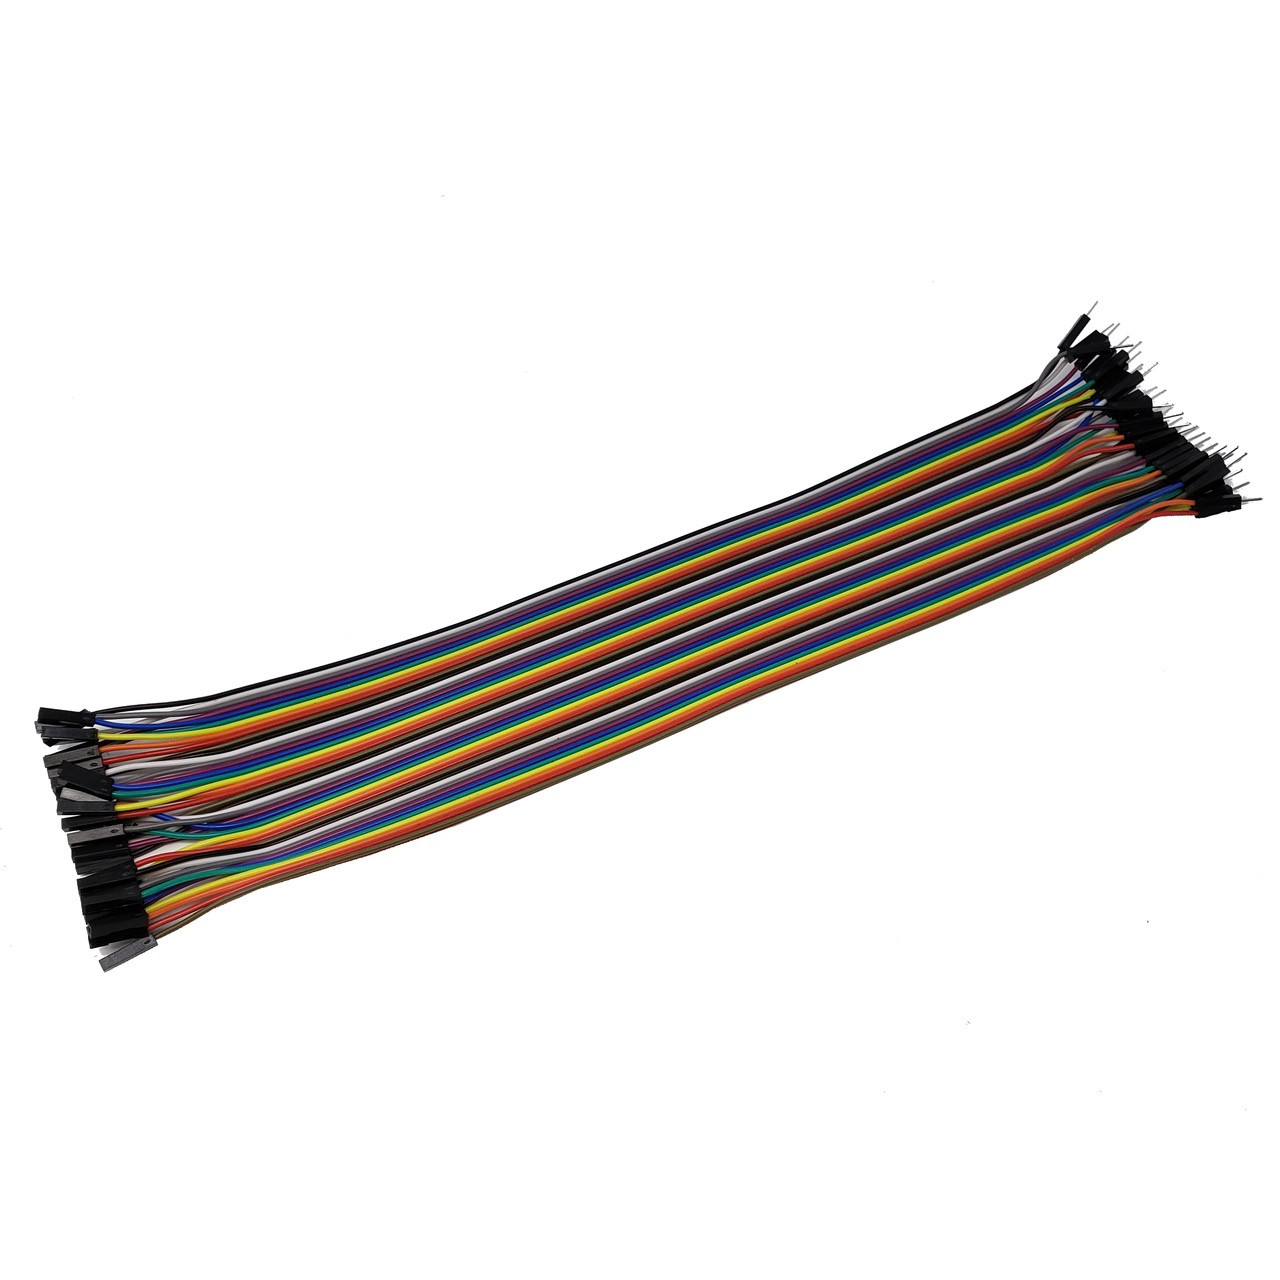 10cm Female - Female 40 Wire Dupont Cable